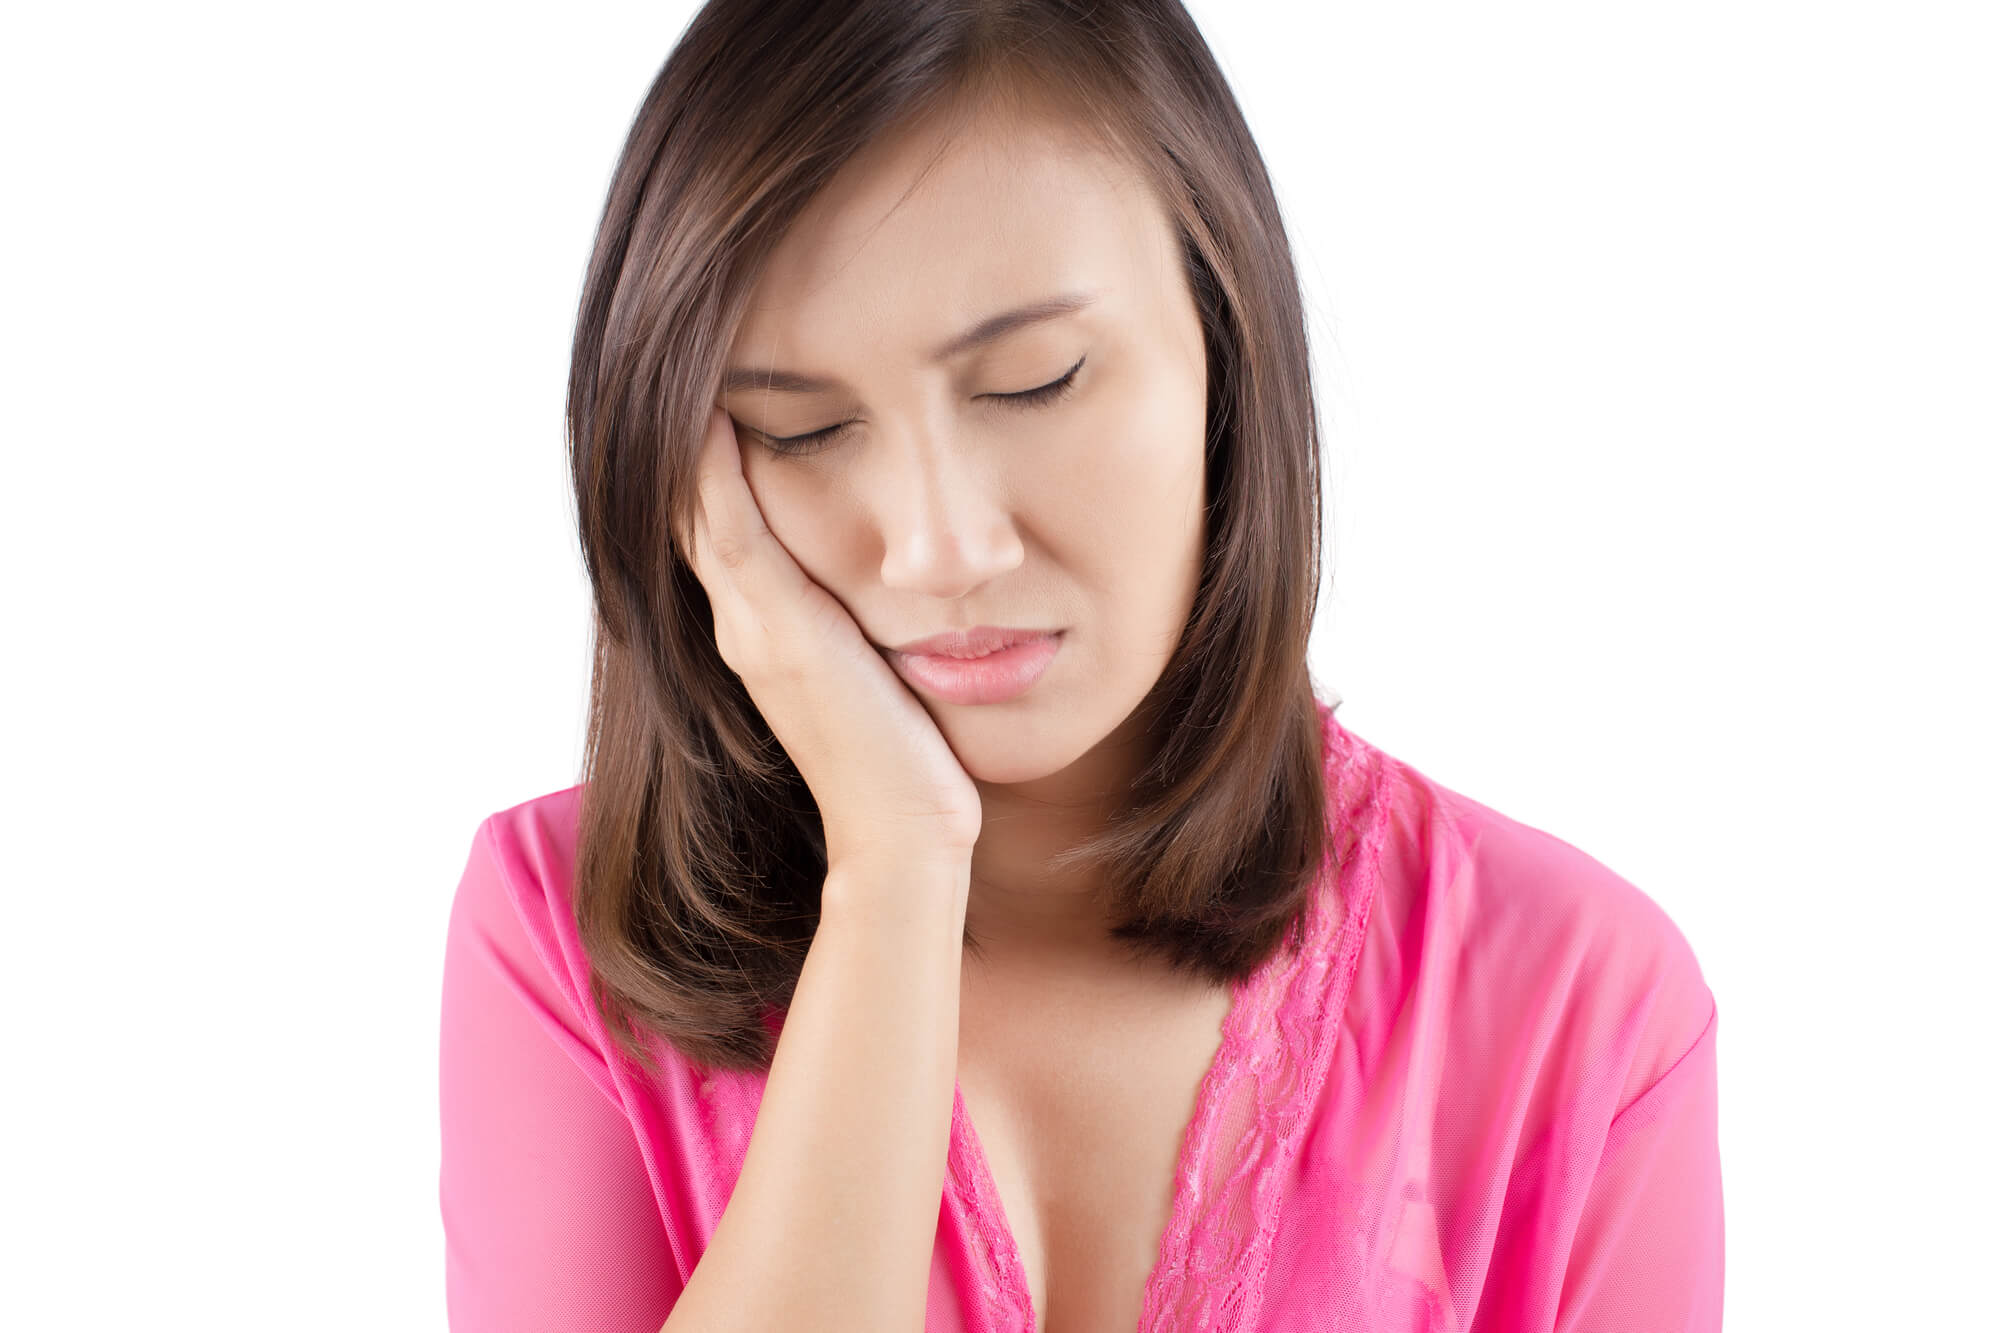 Woman with pain needs coral springs root canal procedure